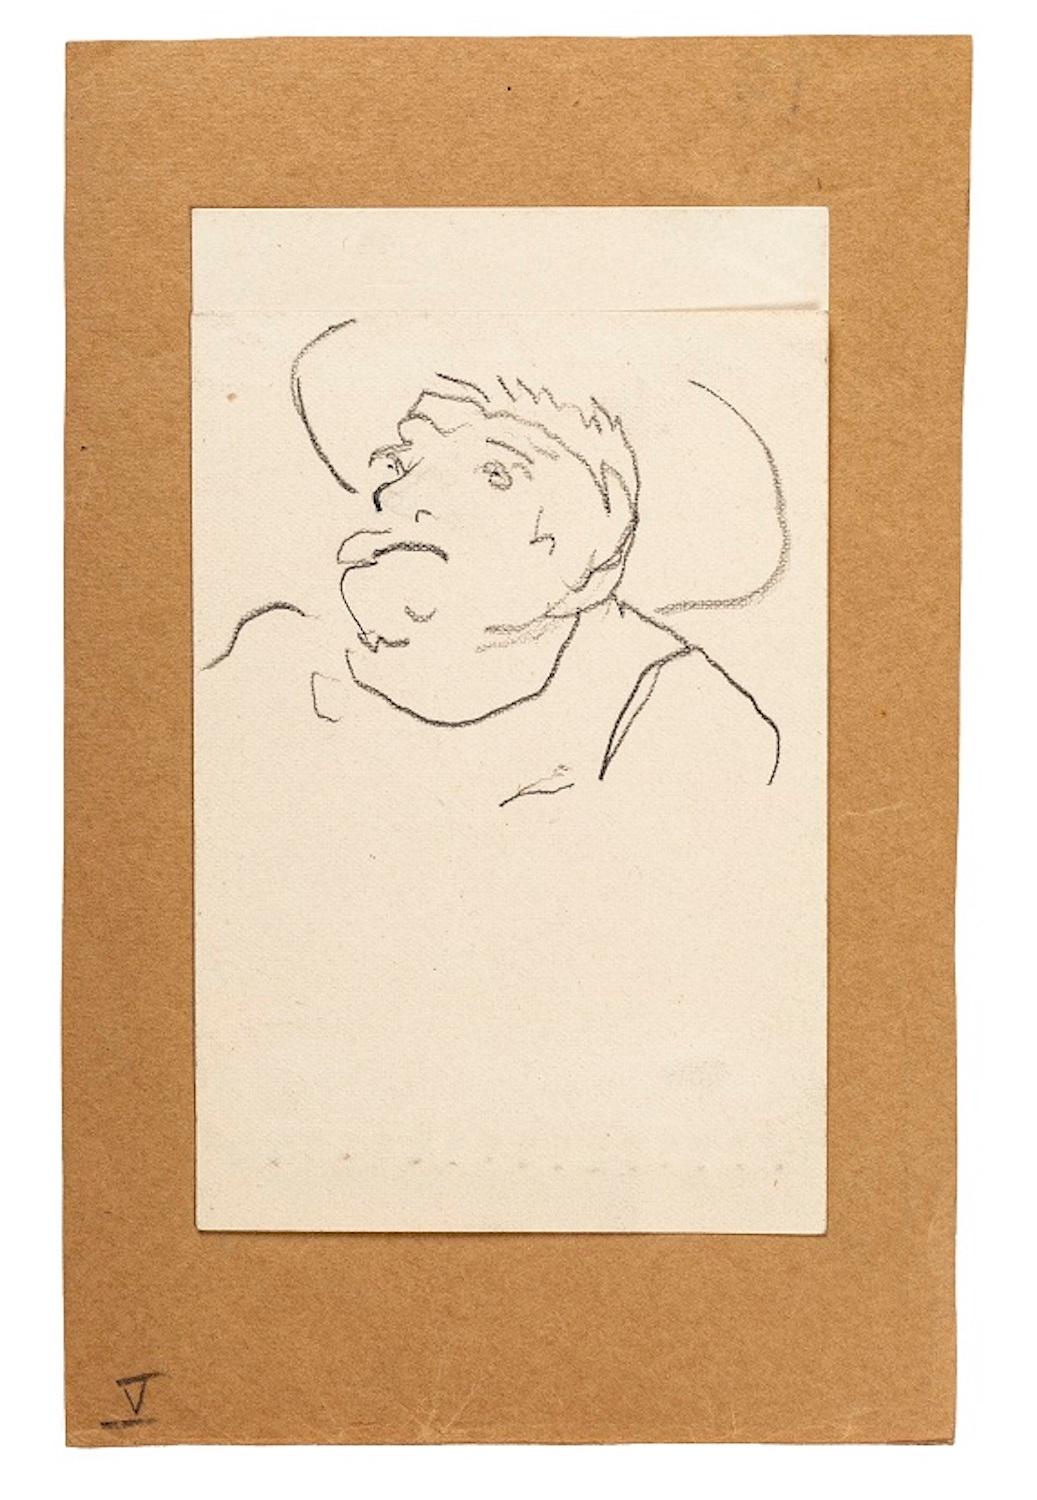 Unknown Figurative Art - Man On Postcard  - Original China Ink Drawing on Paper - Early 20th Century